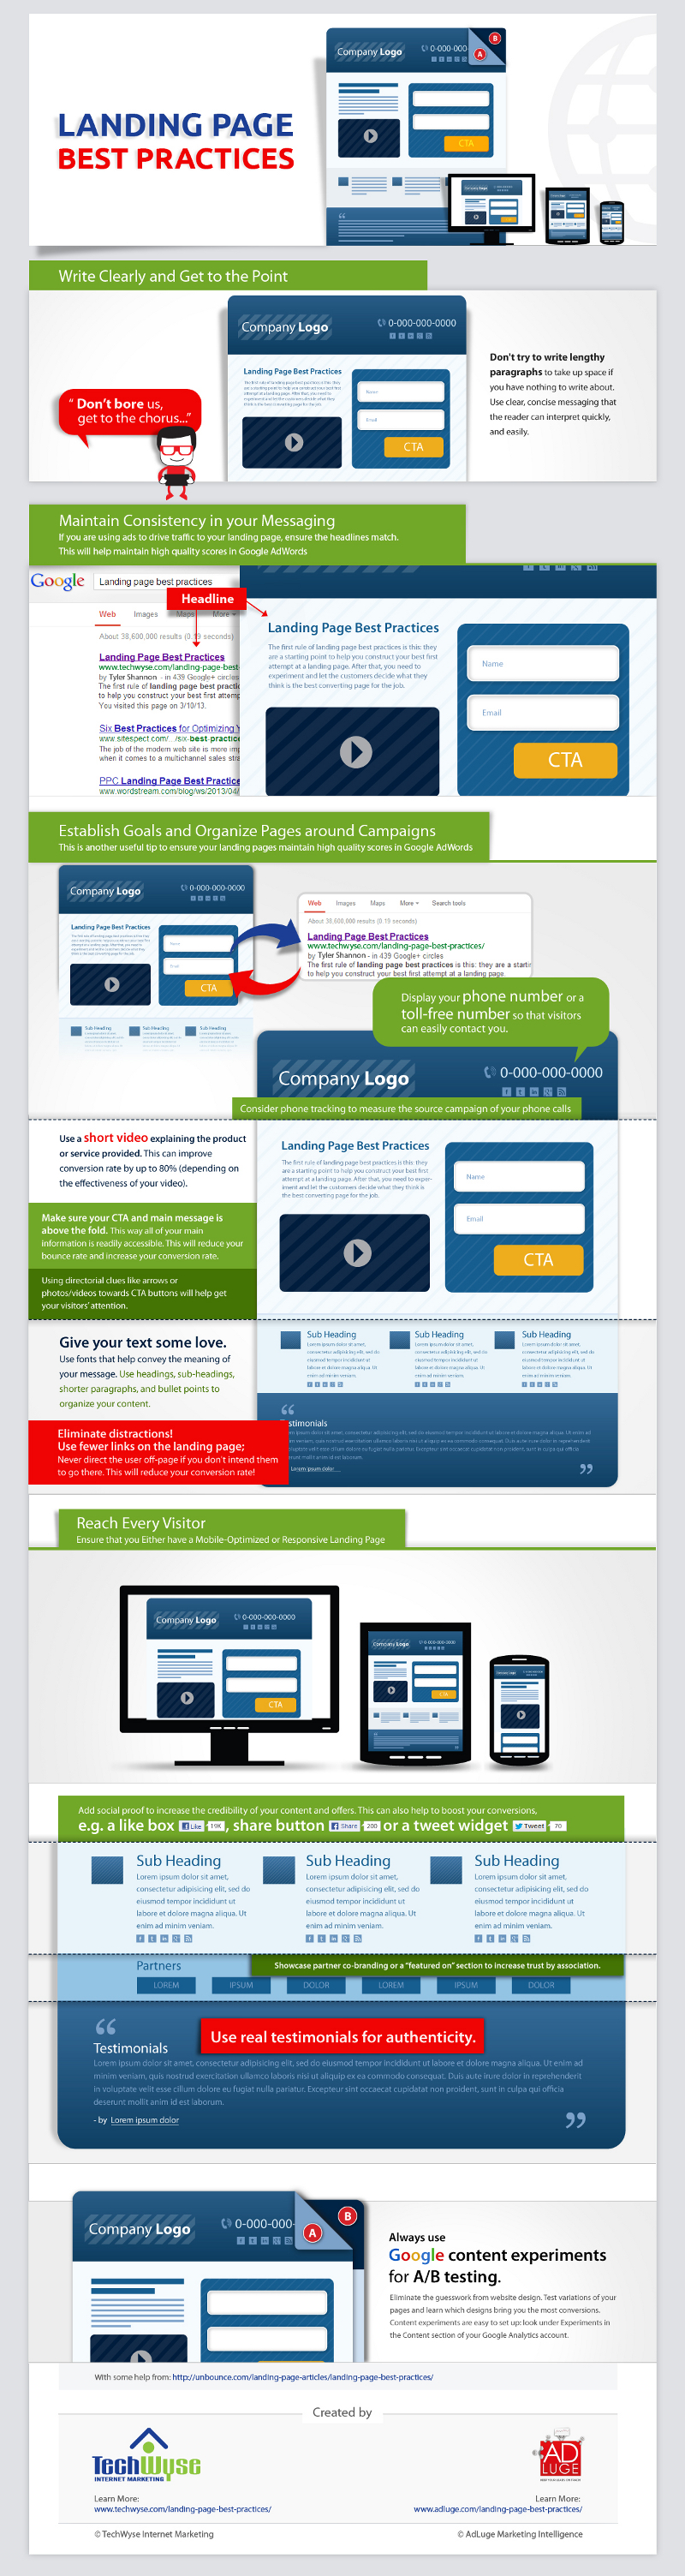 Best Practices for Landing Page Optimization